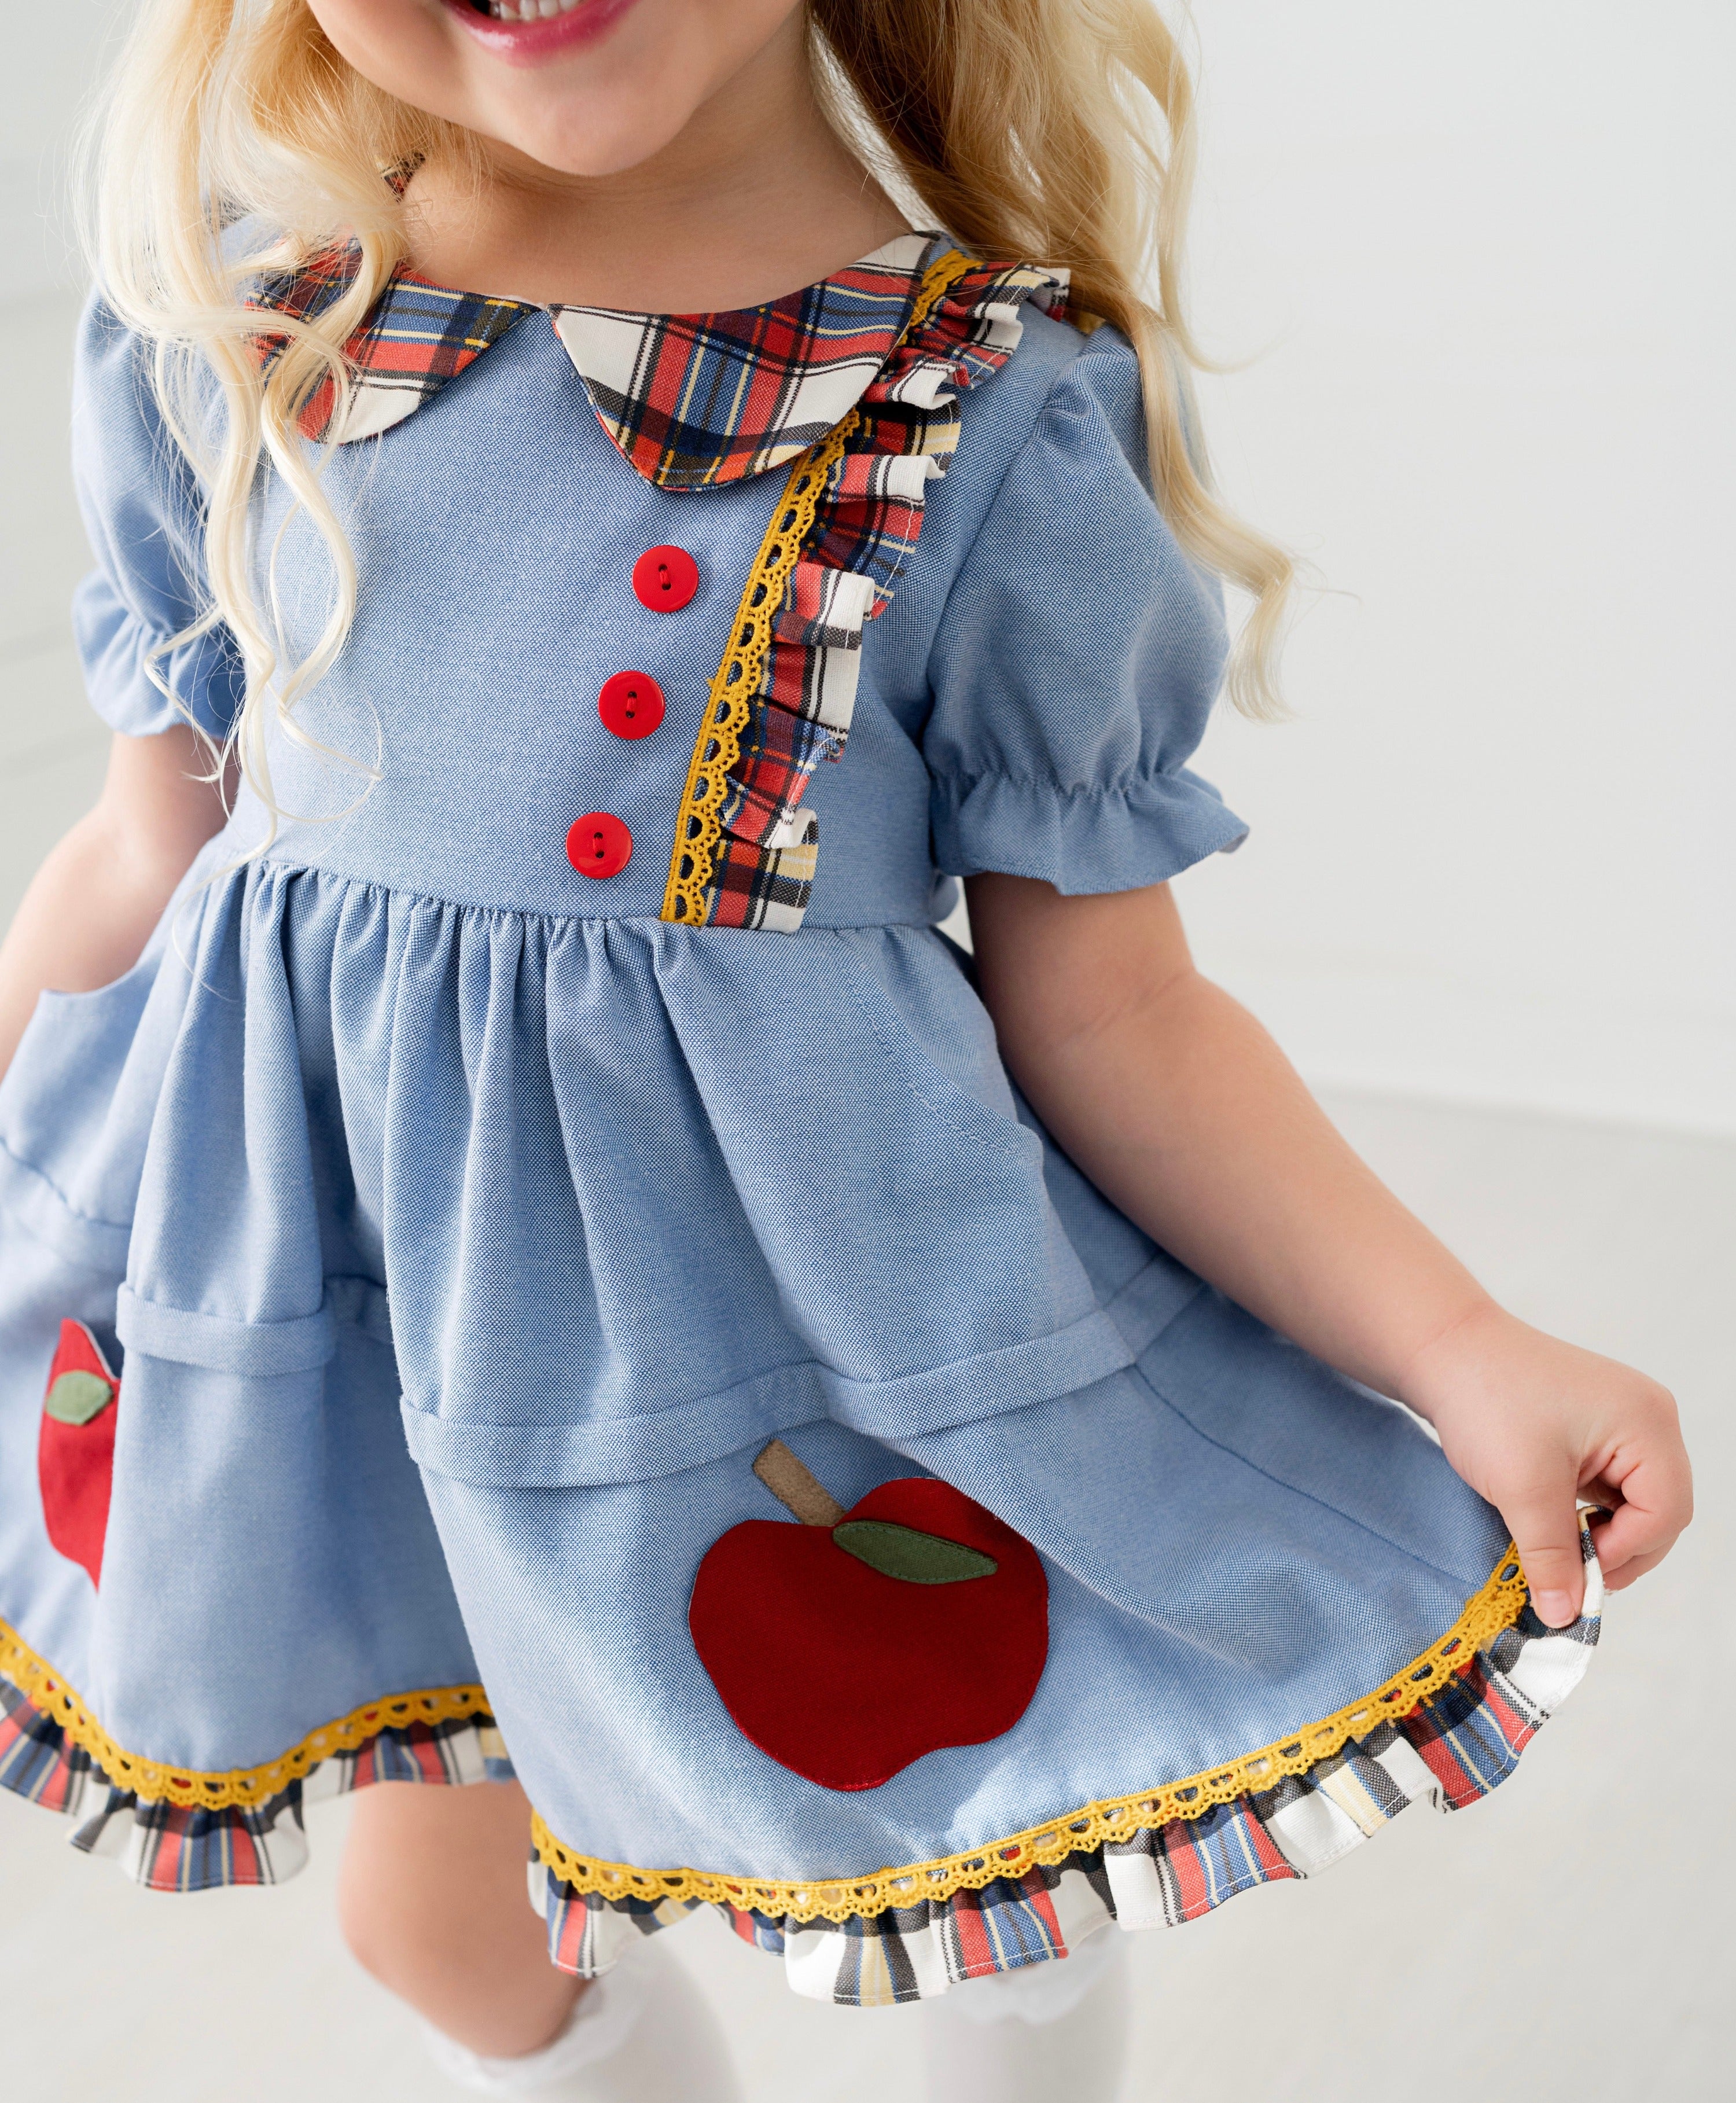 Apple Plaid Vintage Length Tunic with Coordinating Ruffle Trim Shorts - Evie's Closet Clothing